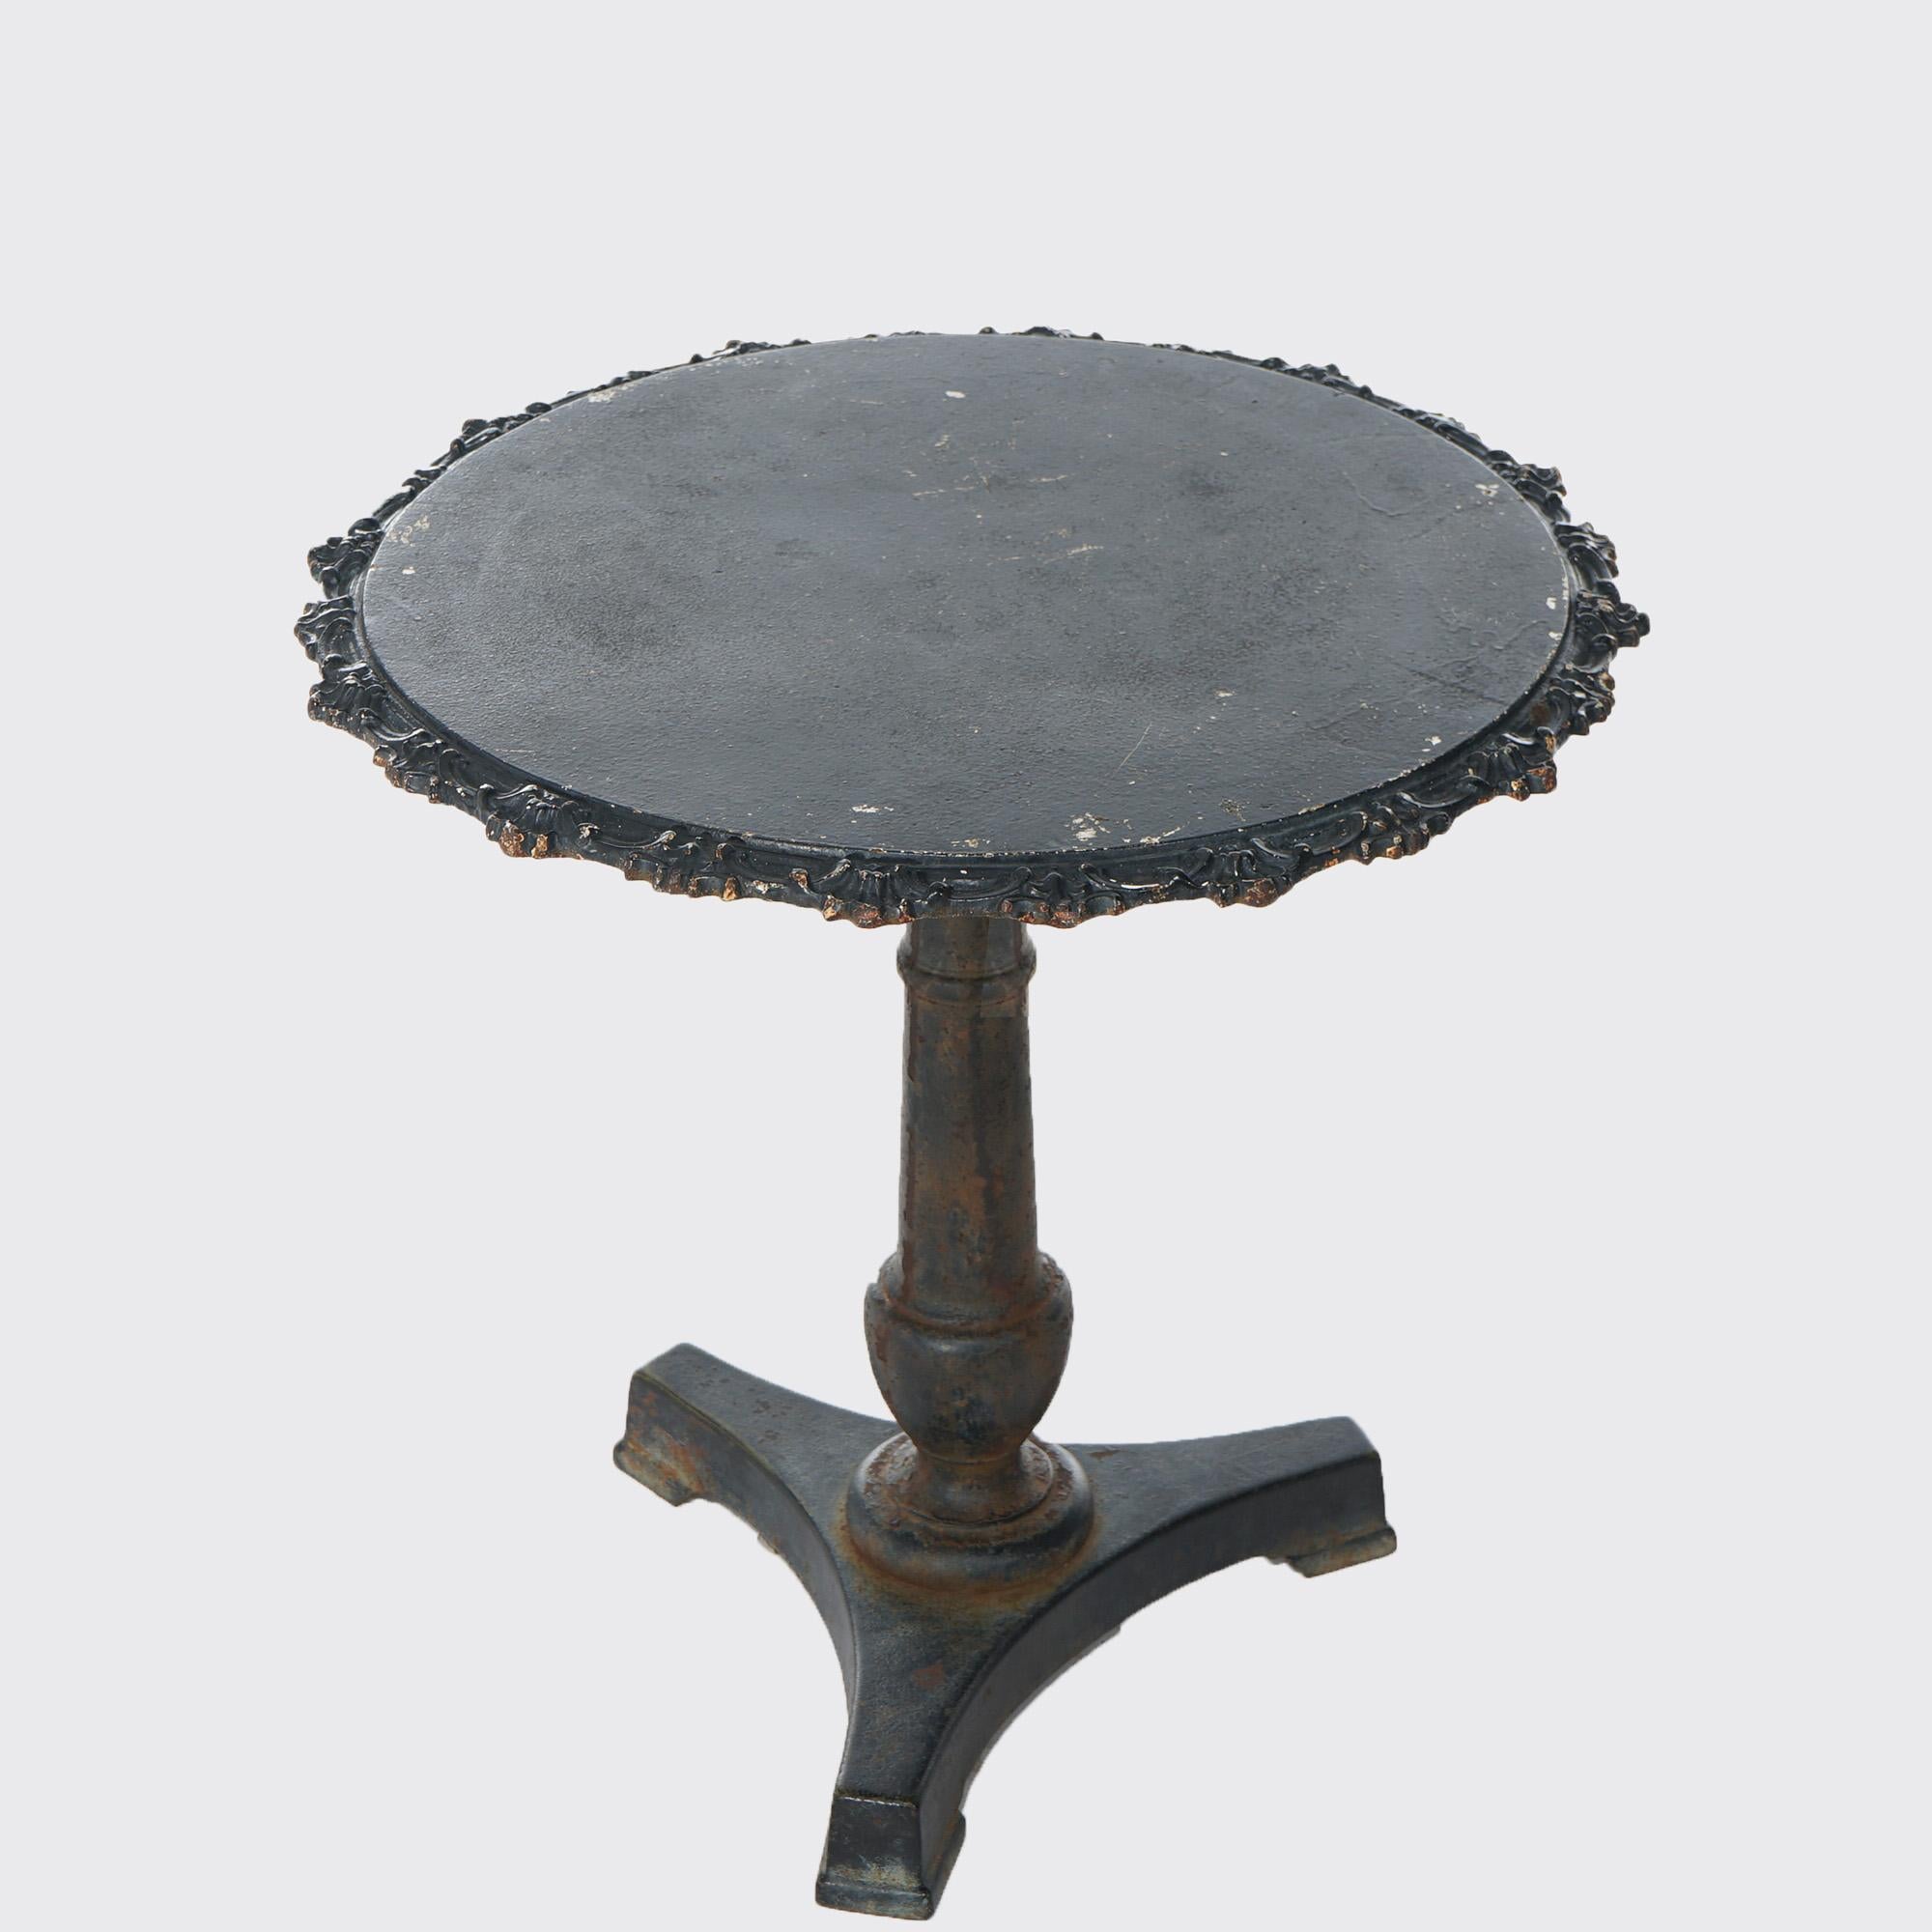 Antique Neoclassical Cast Iron Café Garden Table by Rudy Groeger Foundry 19thC For Sale 3